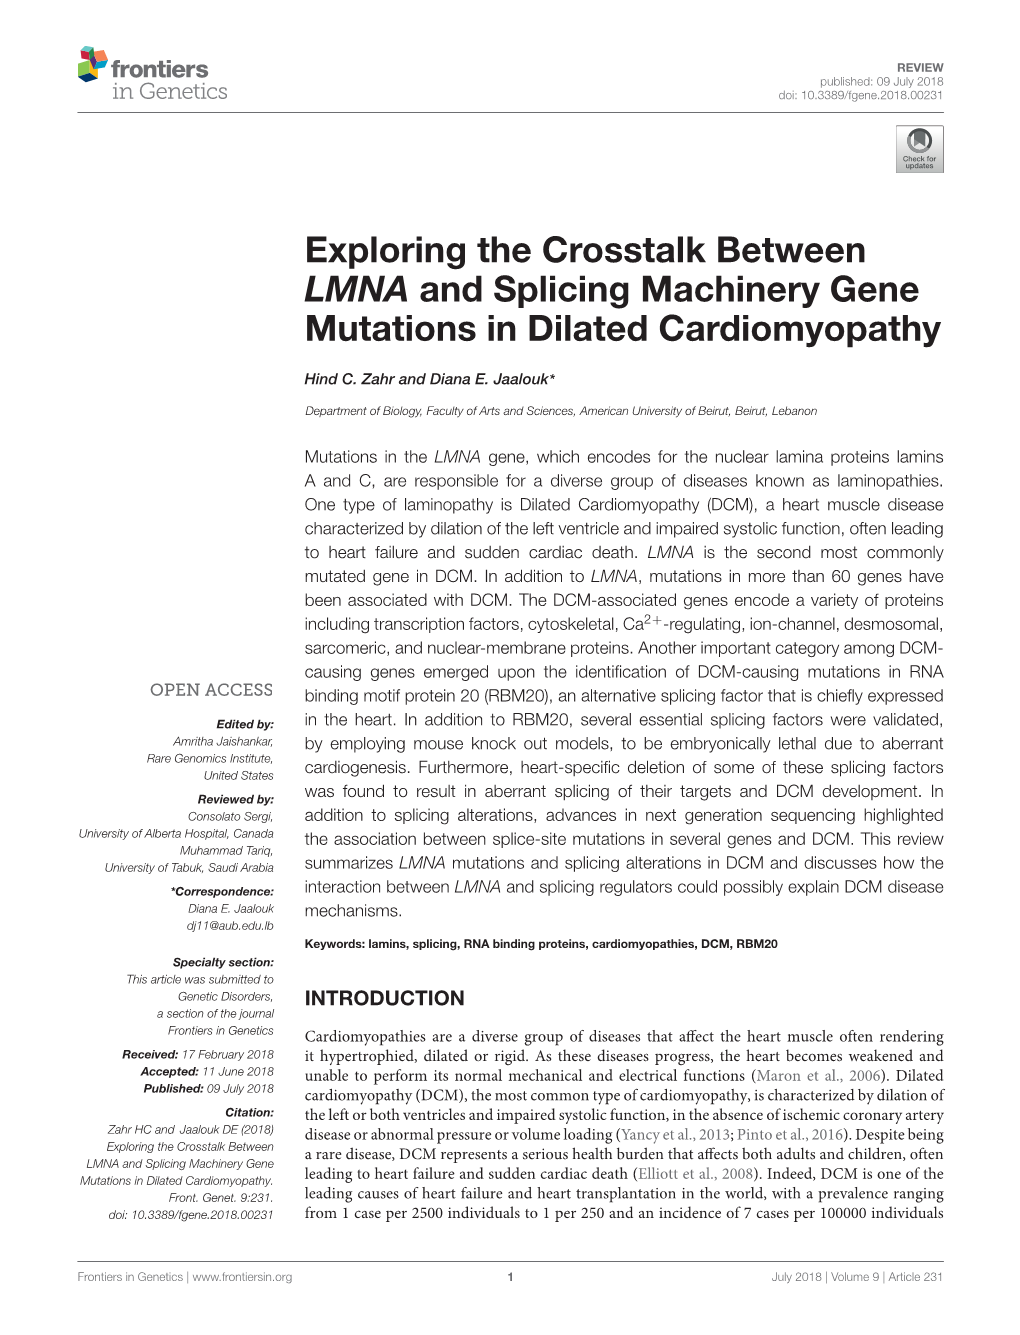 Exploring the Crosstalk Between LMNA and Splicing Machinery Gene Mutations in Dilated Cardiomyopathy